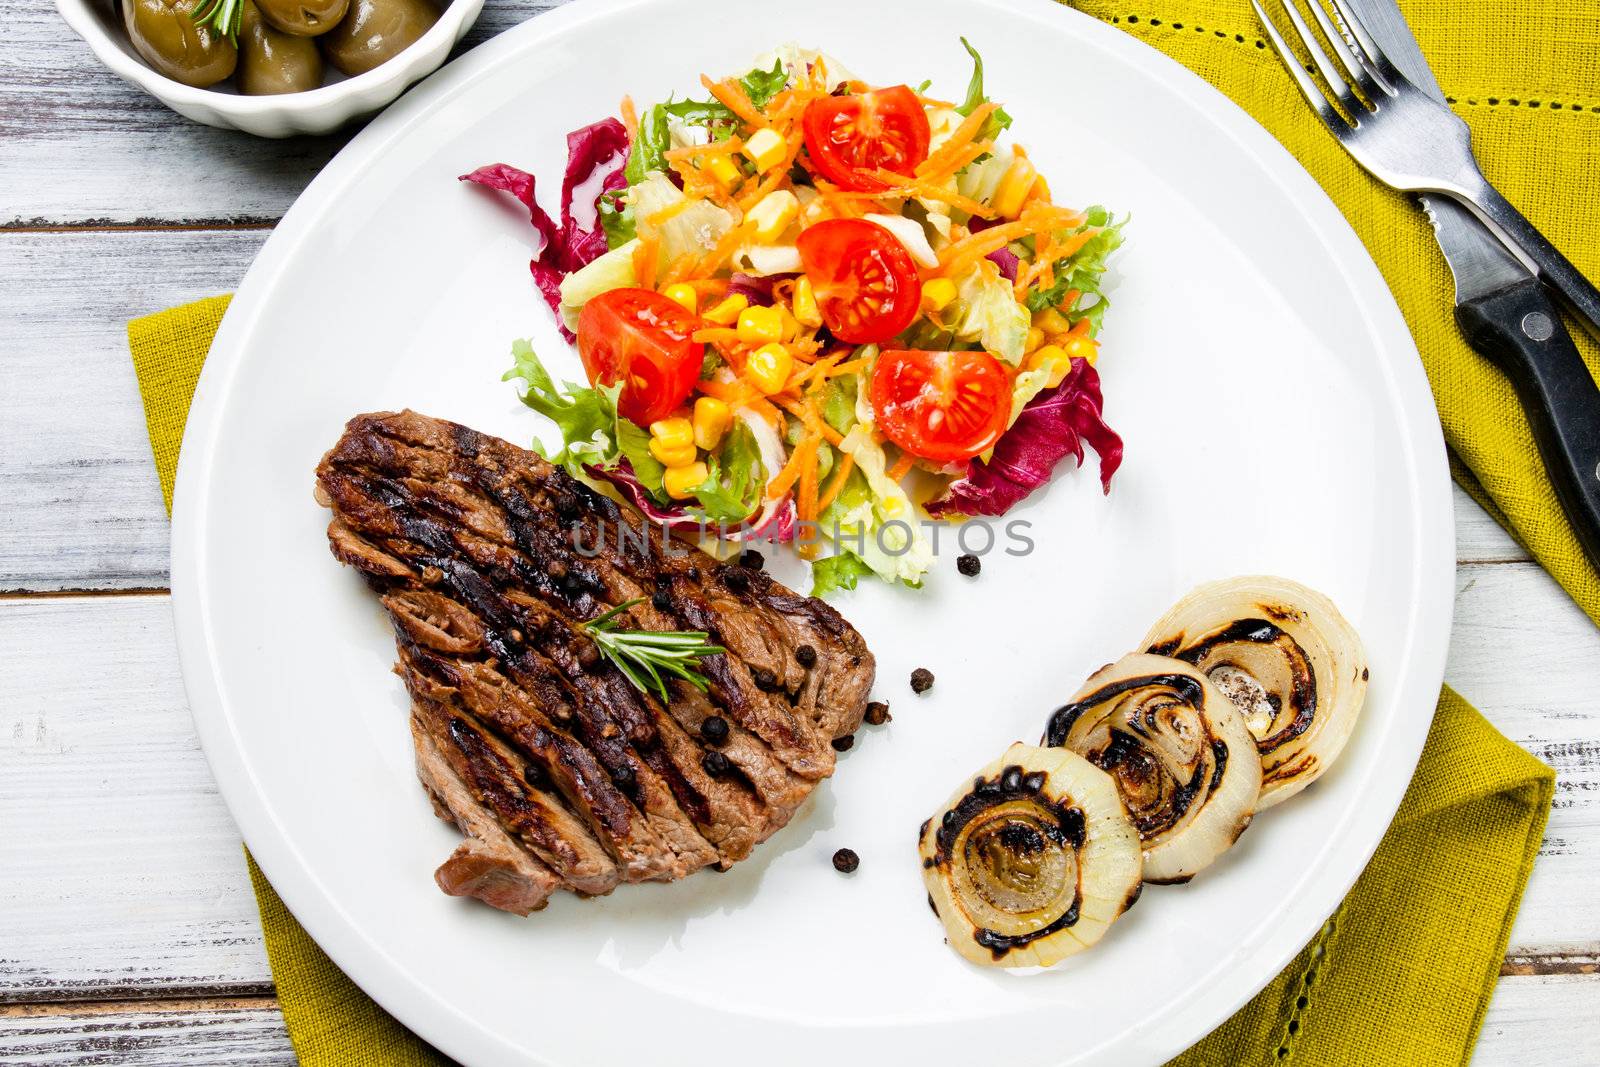 cooked cut of meat garnish with mixed salad